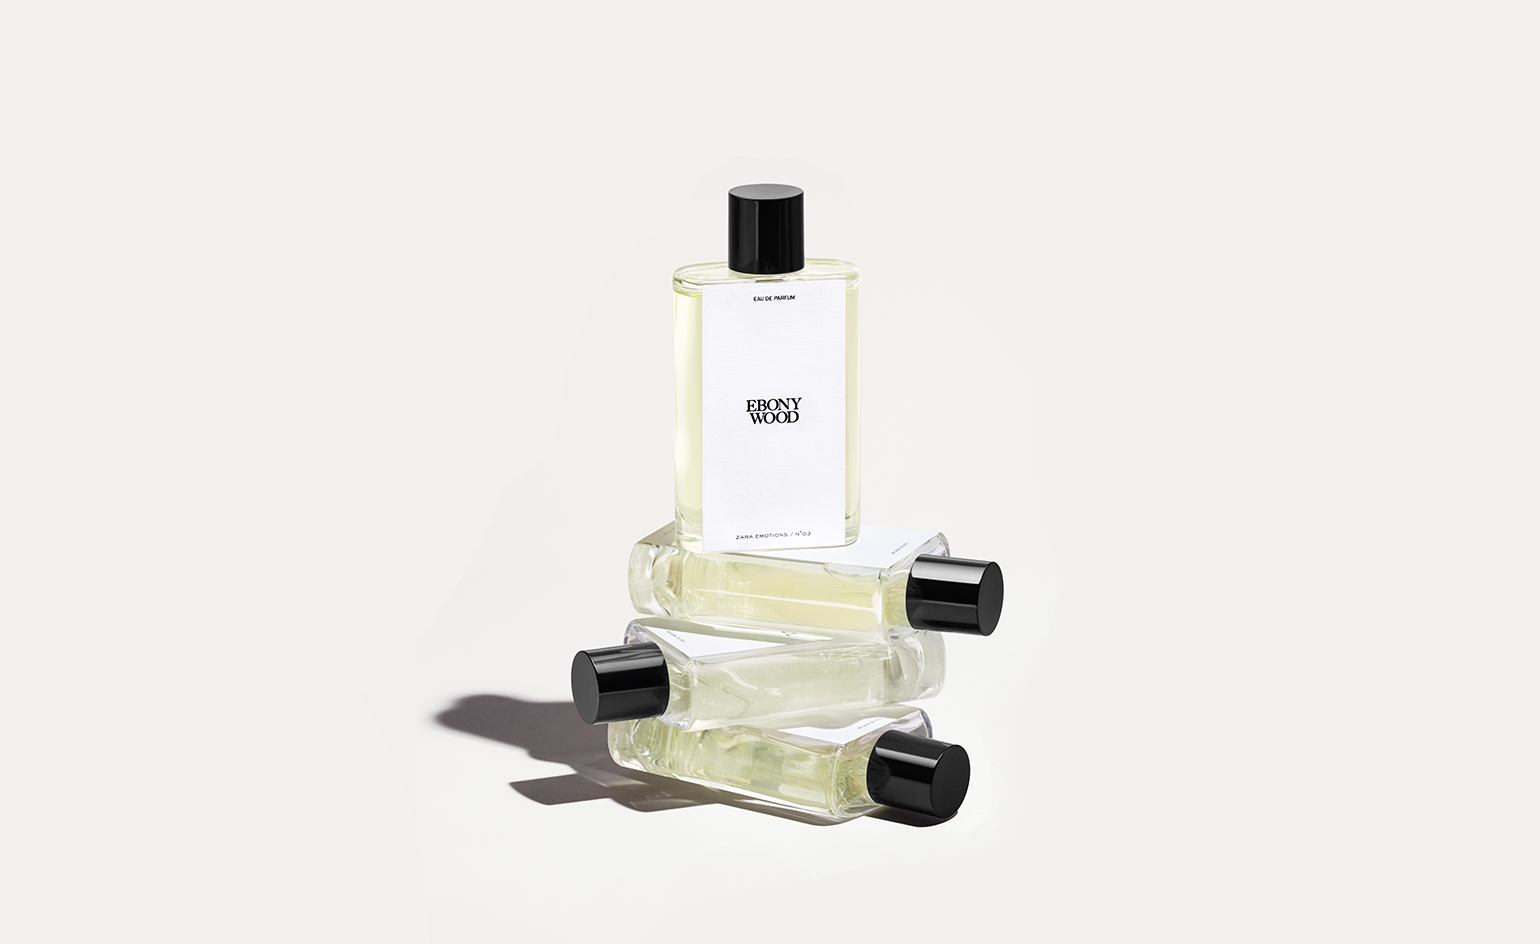 Jo Malone on her brand-new perfume collection with Zara